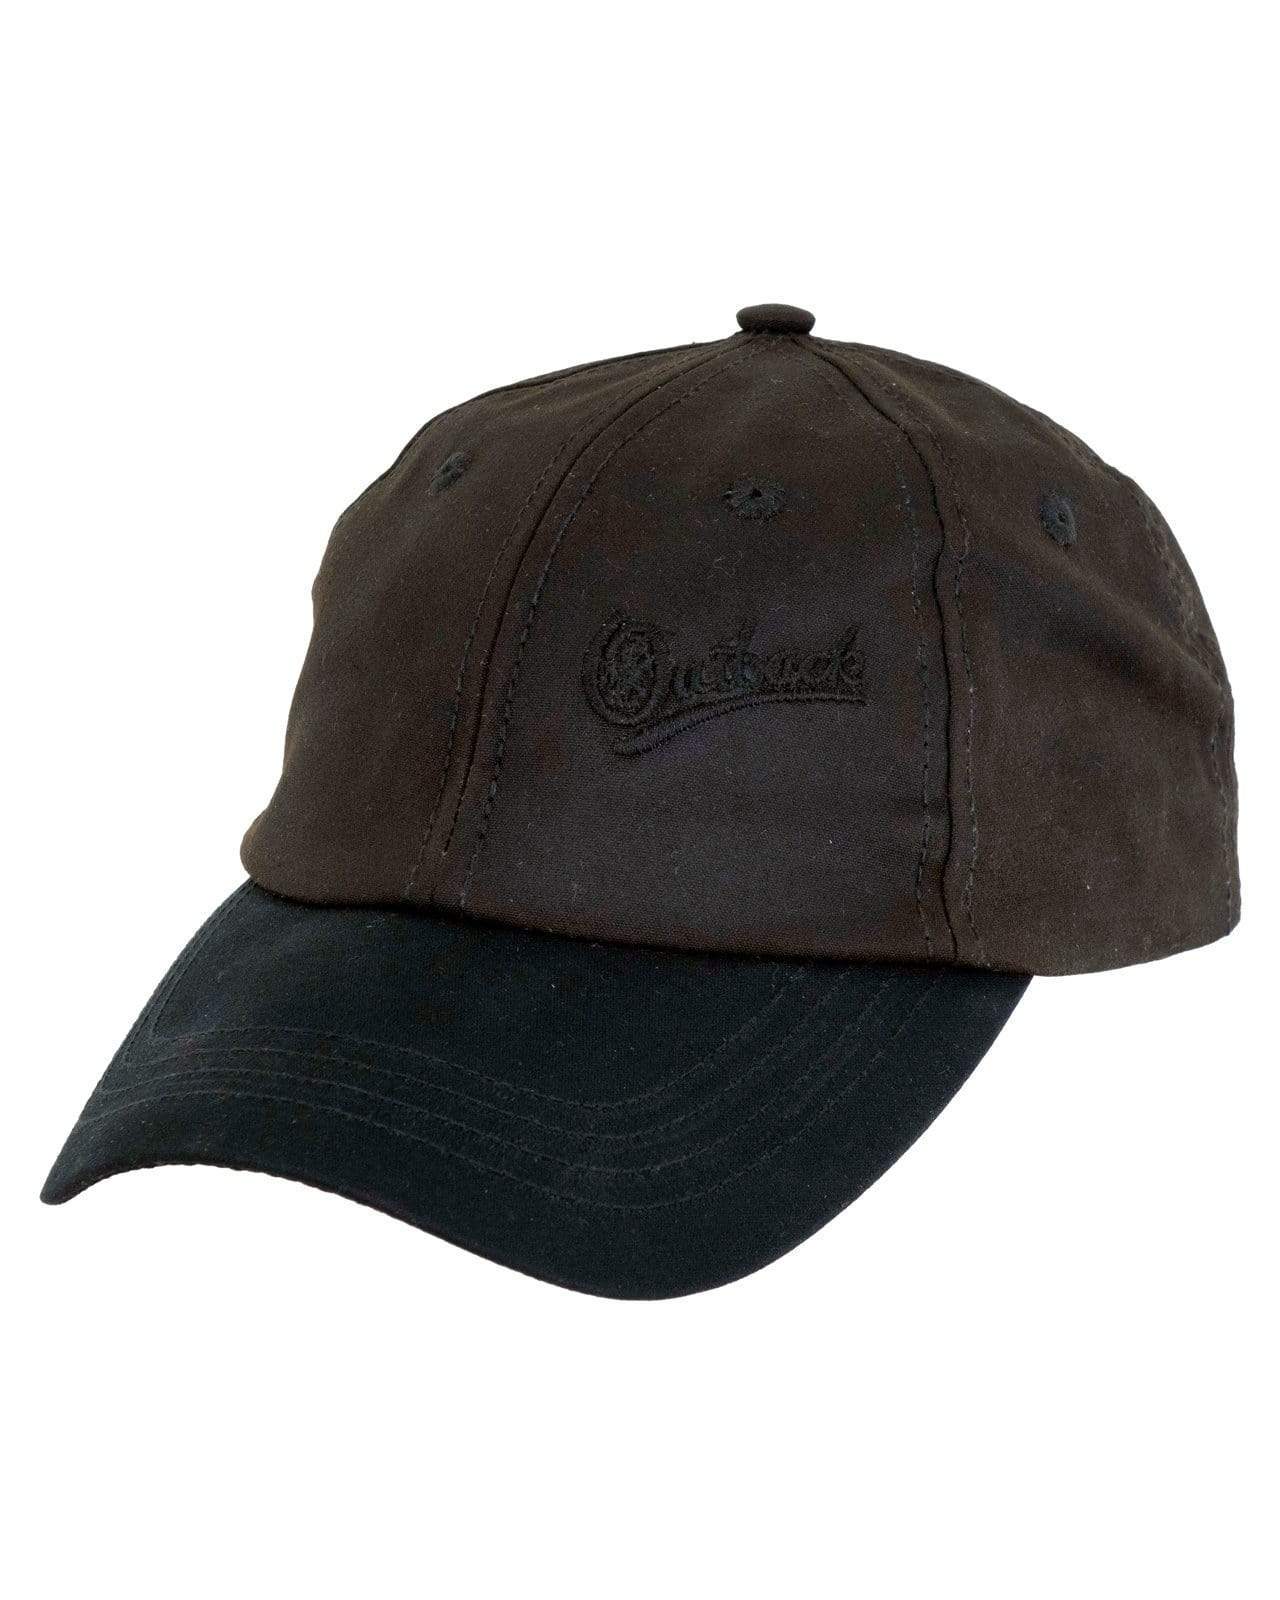 Outback Trading Company Aussie Slugger Cap Brown / ONE 1483-BRN-ONE 789043015447 Hats